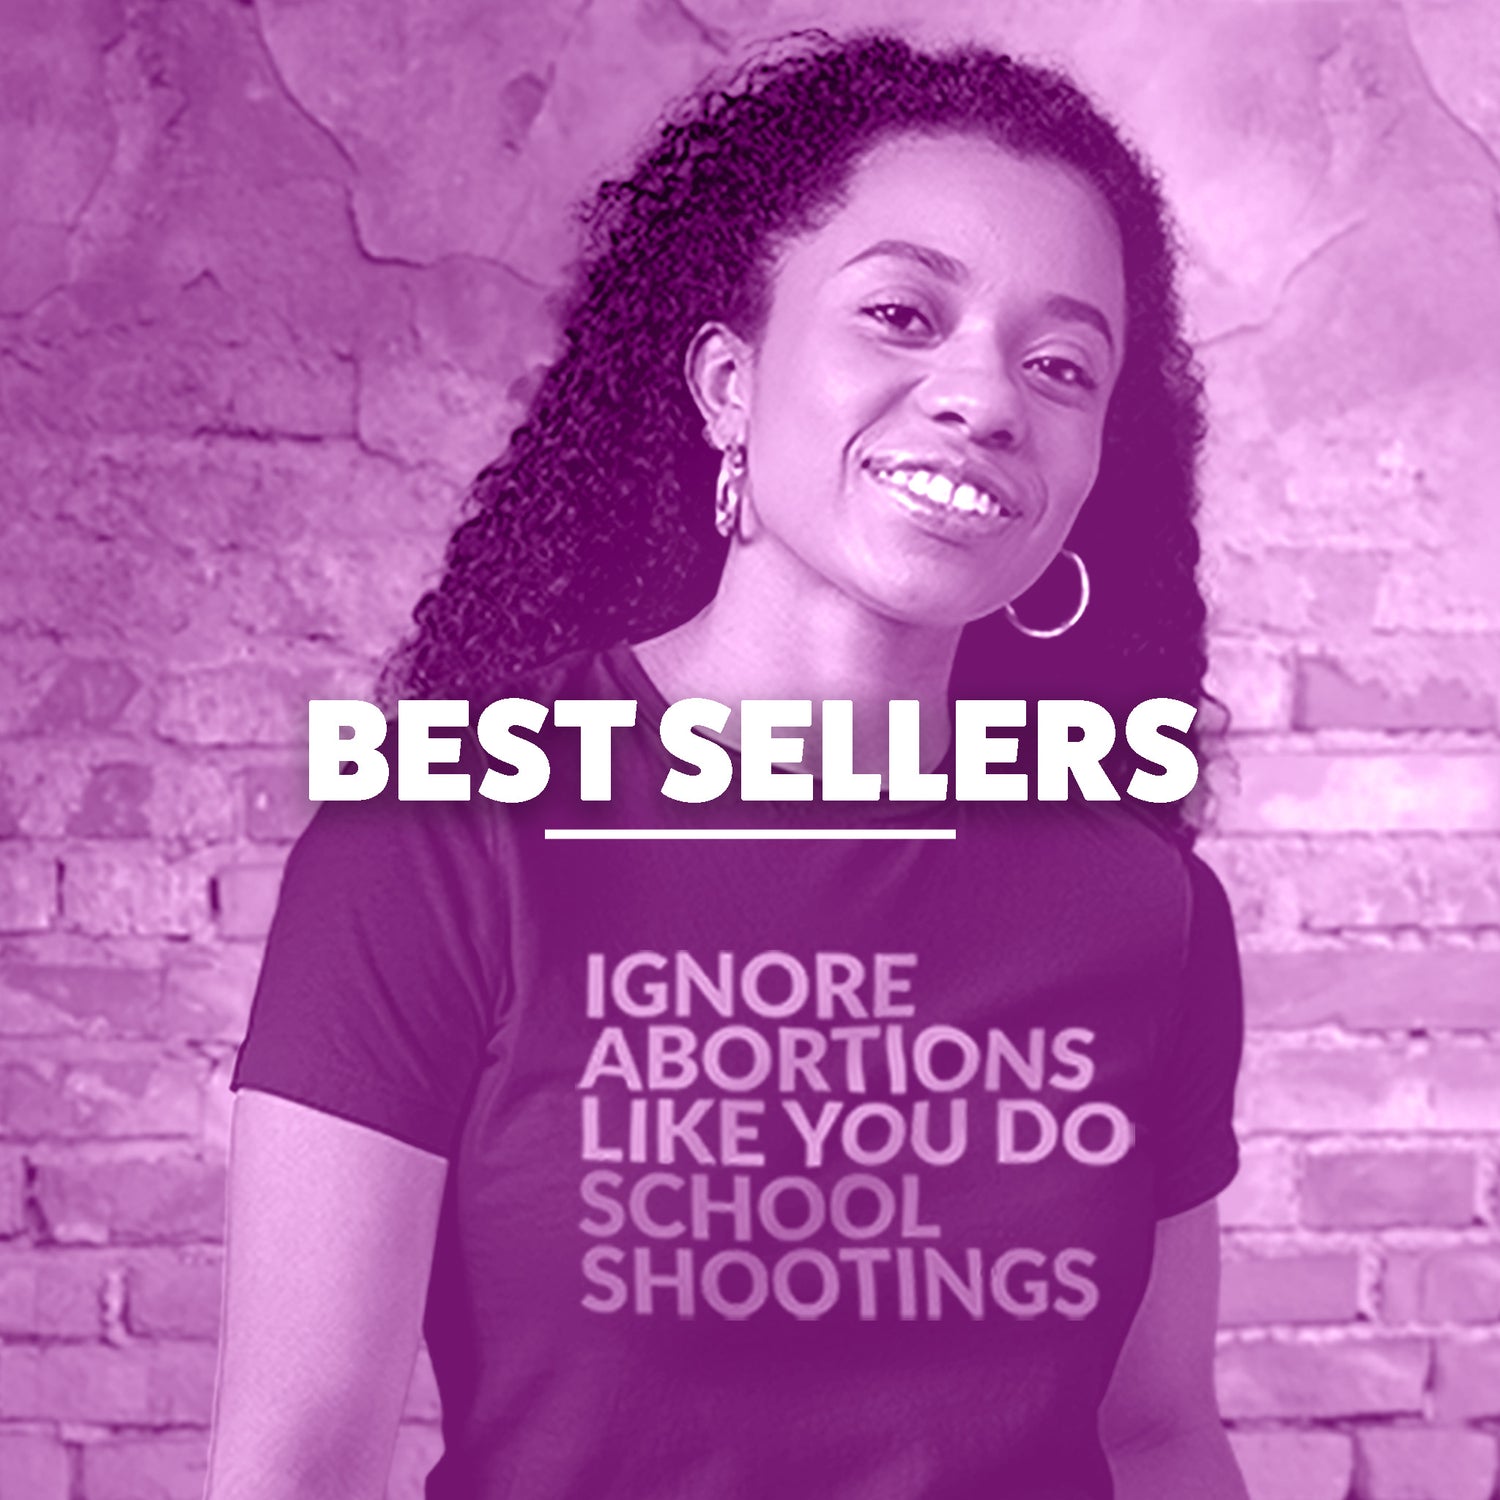 A woman of color is wearing a shirt that says “Ignore Aboritons Like You Do School Shootings.” This image is for our Best Sellers Collection.